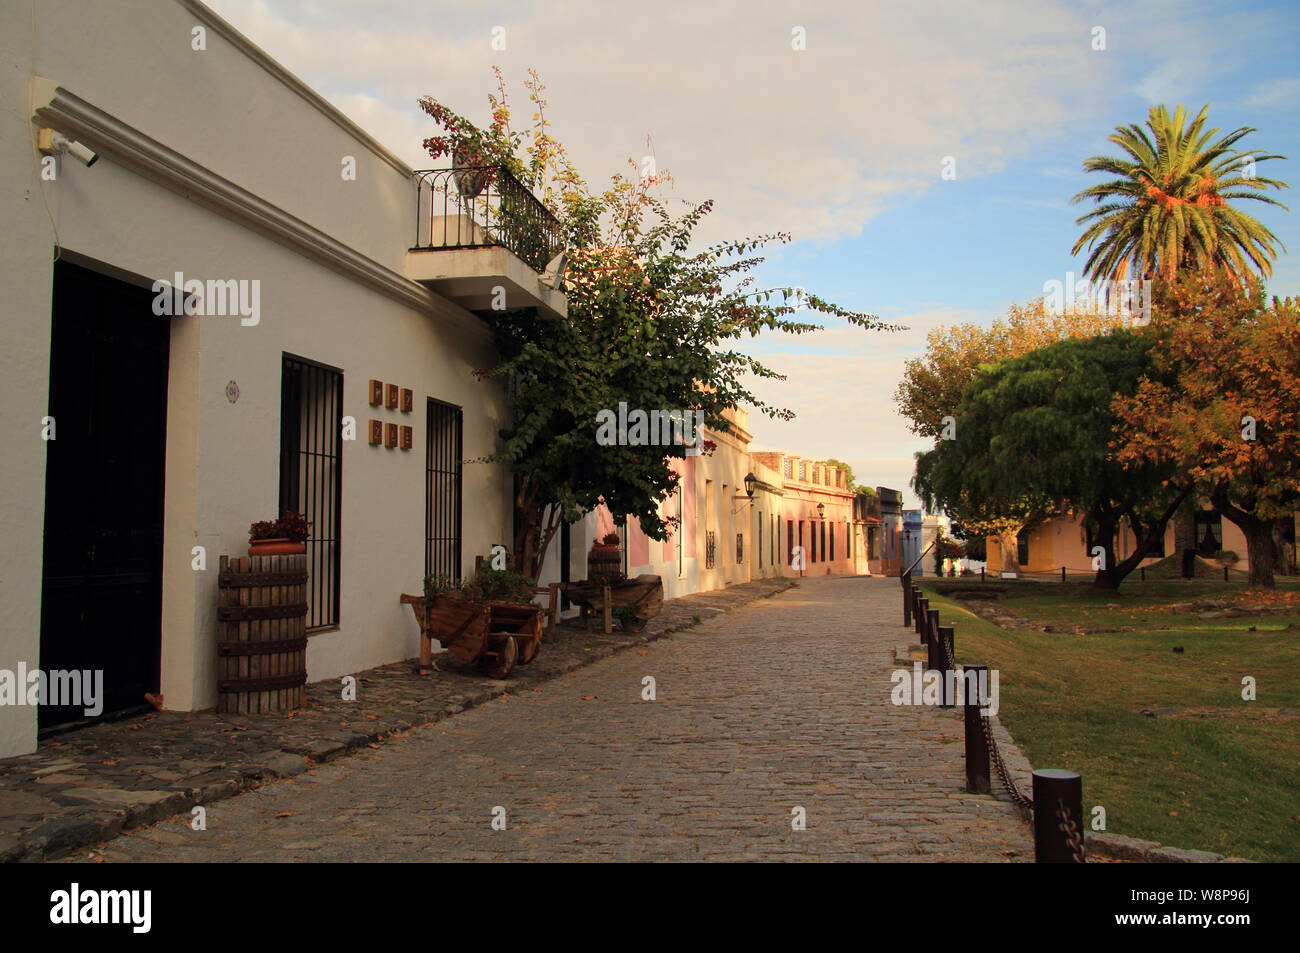 Calle de la Playa is one of numerous quaint cobblestone streets that meander through Colonia Del Sacramento, located in the country of Uruguay Stock Photo